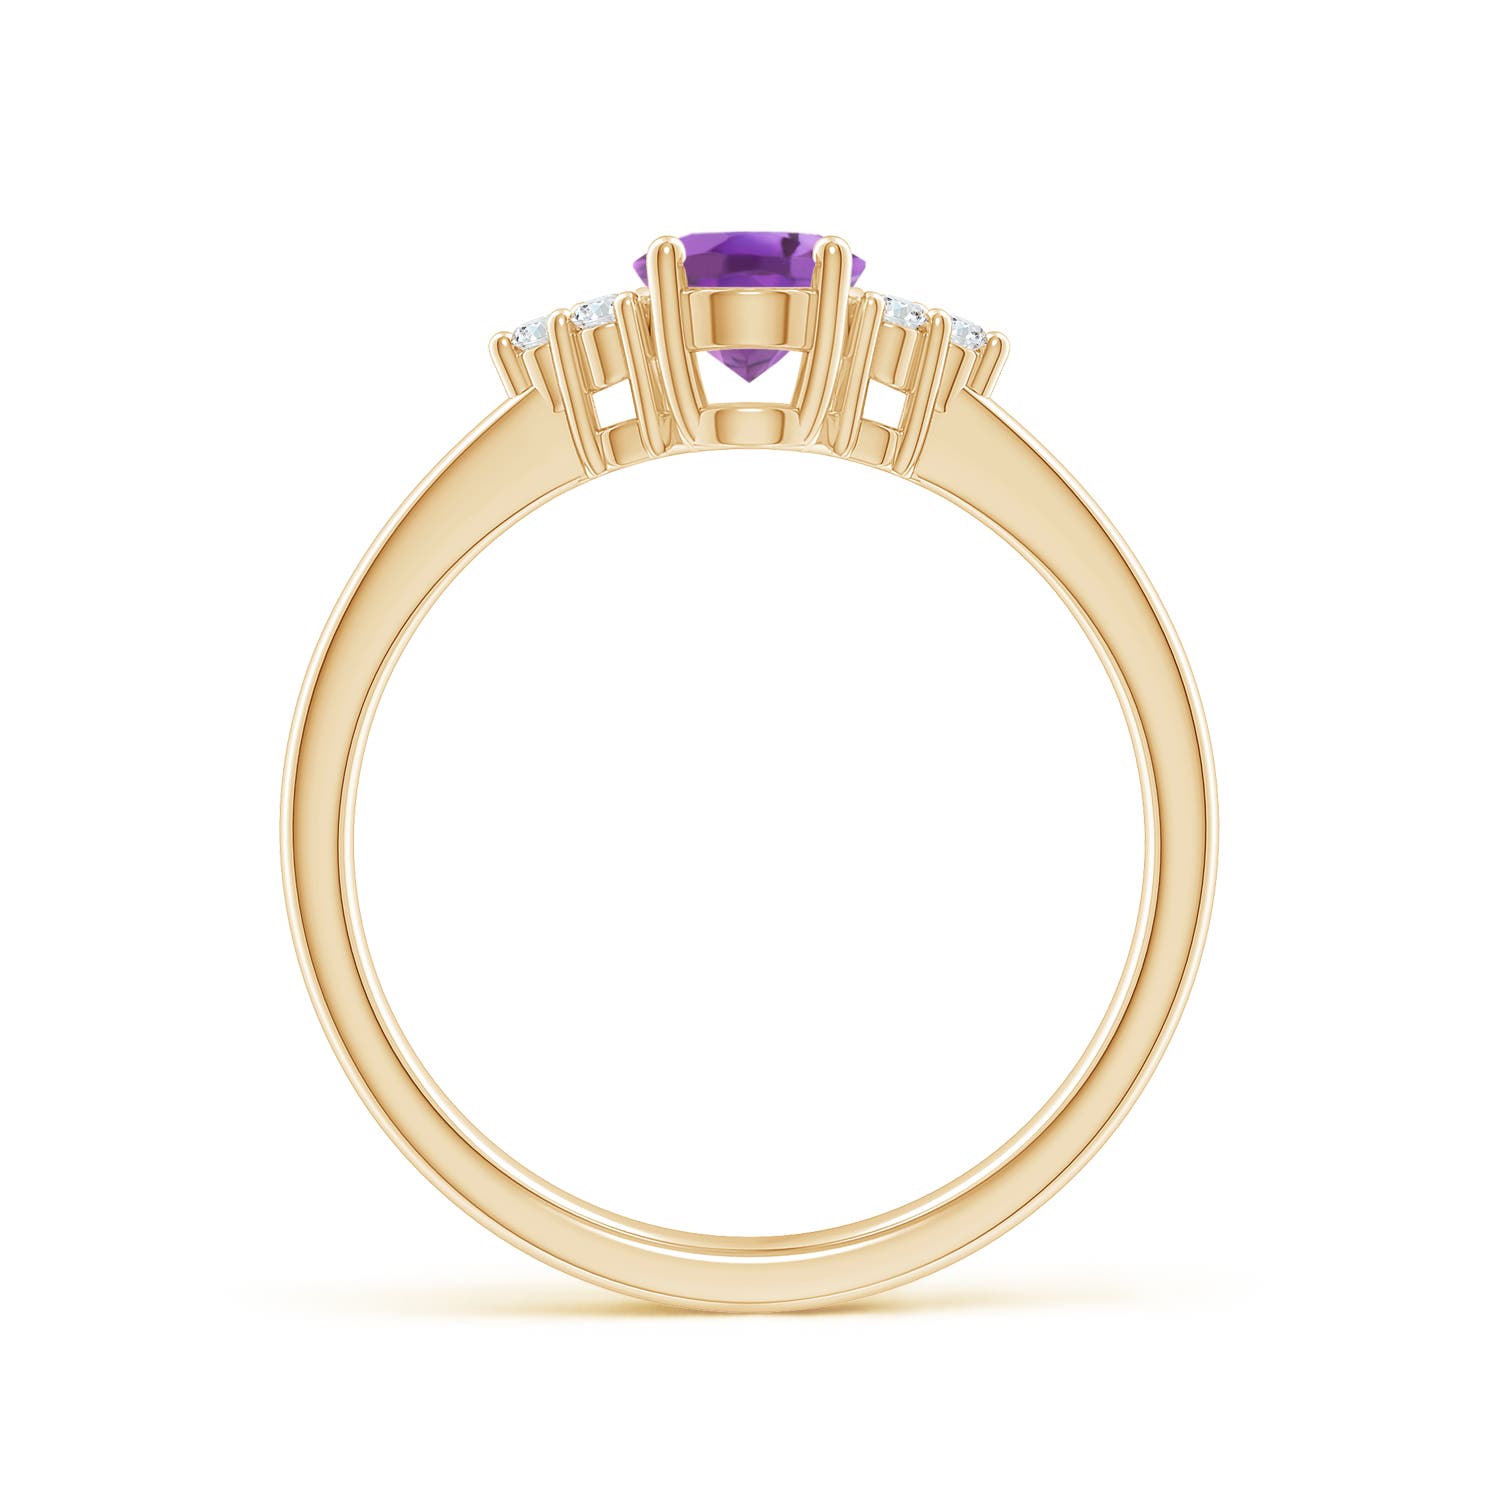 A - Amethyst / 0.78 CT / 14 KT Yellow Gold